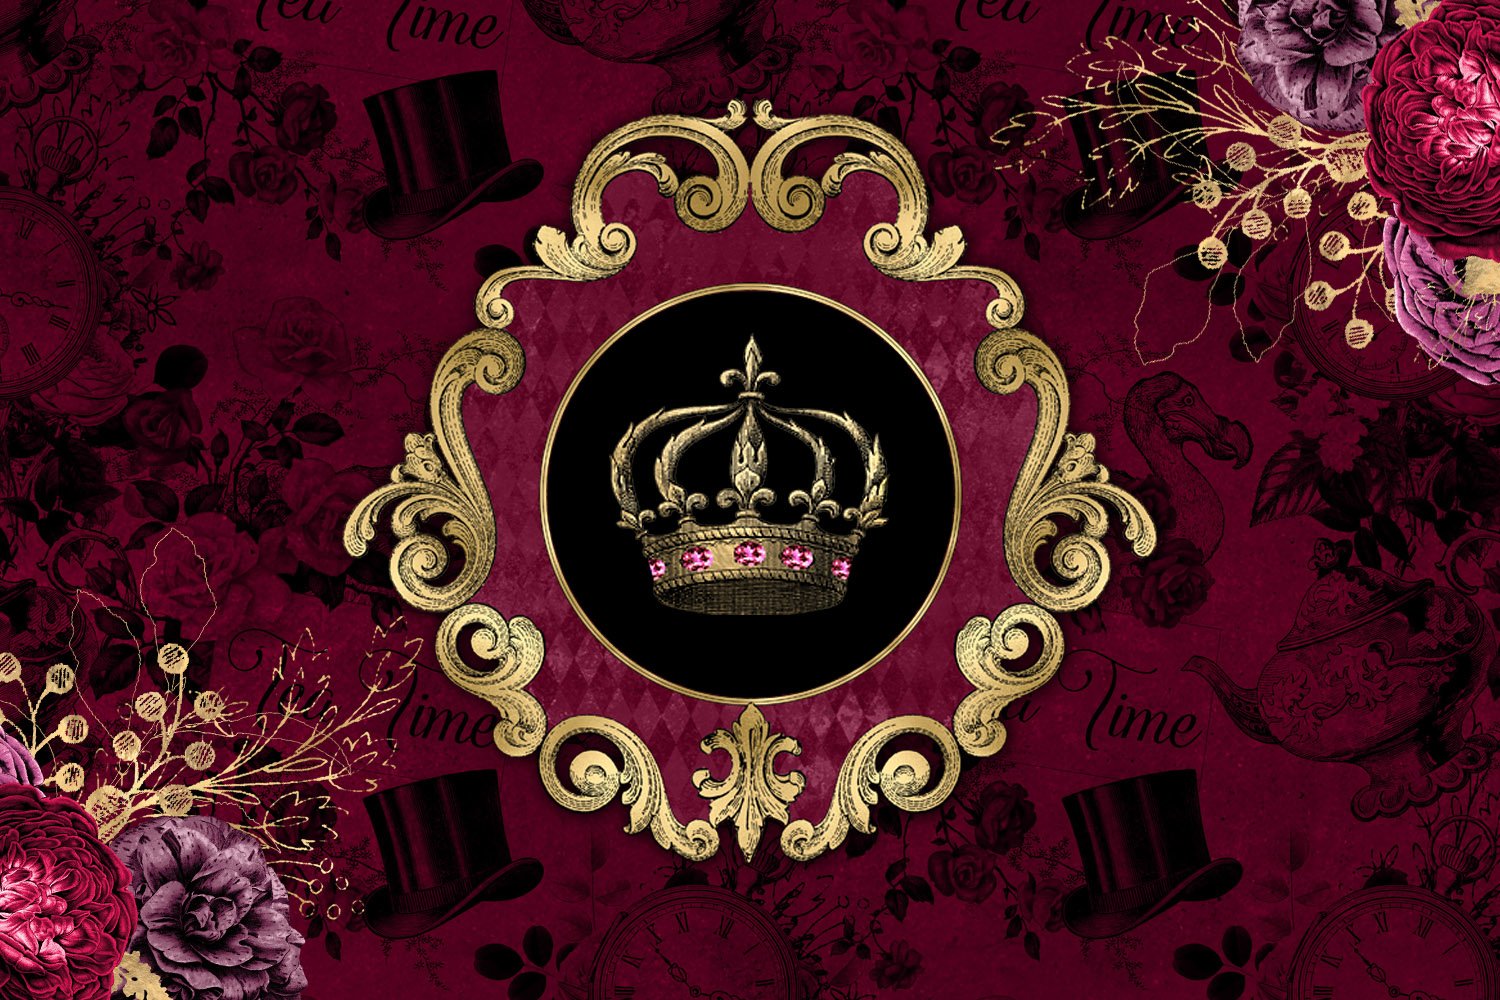 Logo with a crown in burgundy color.